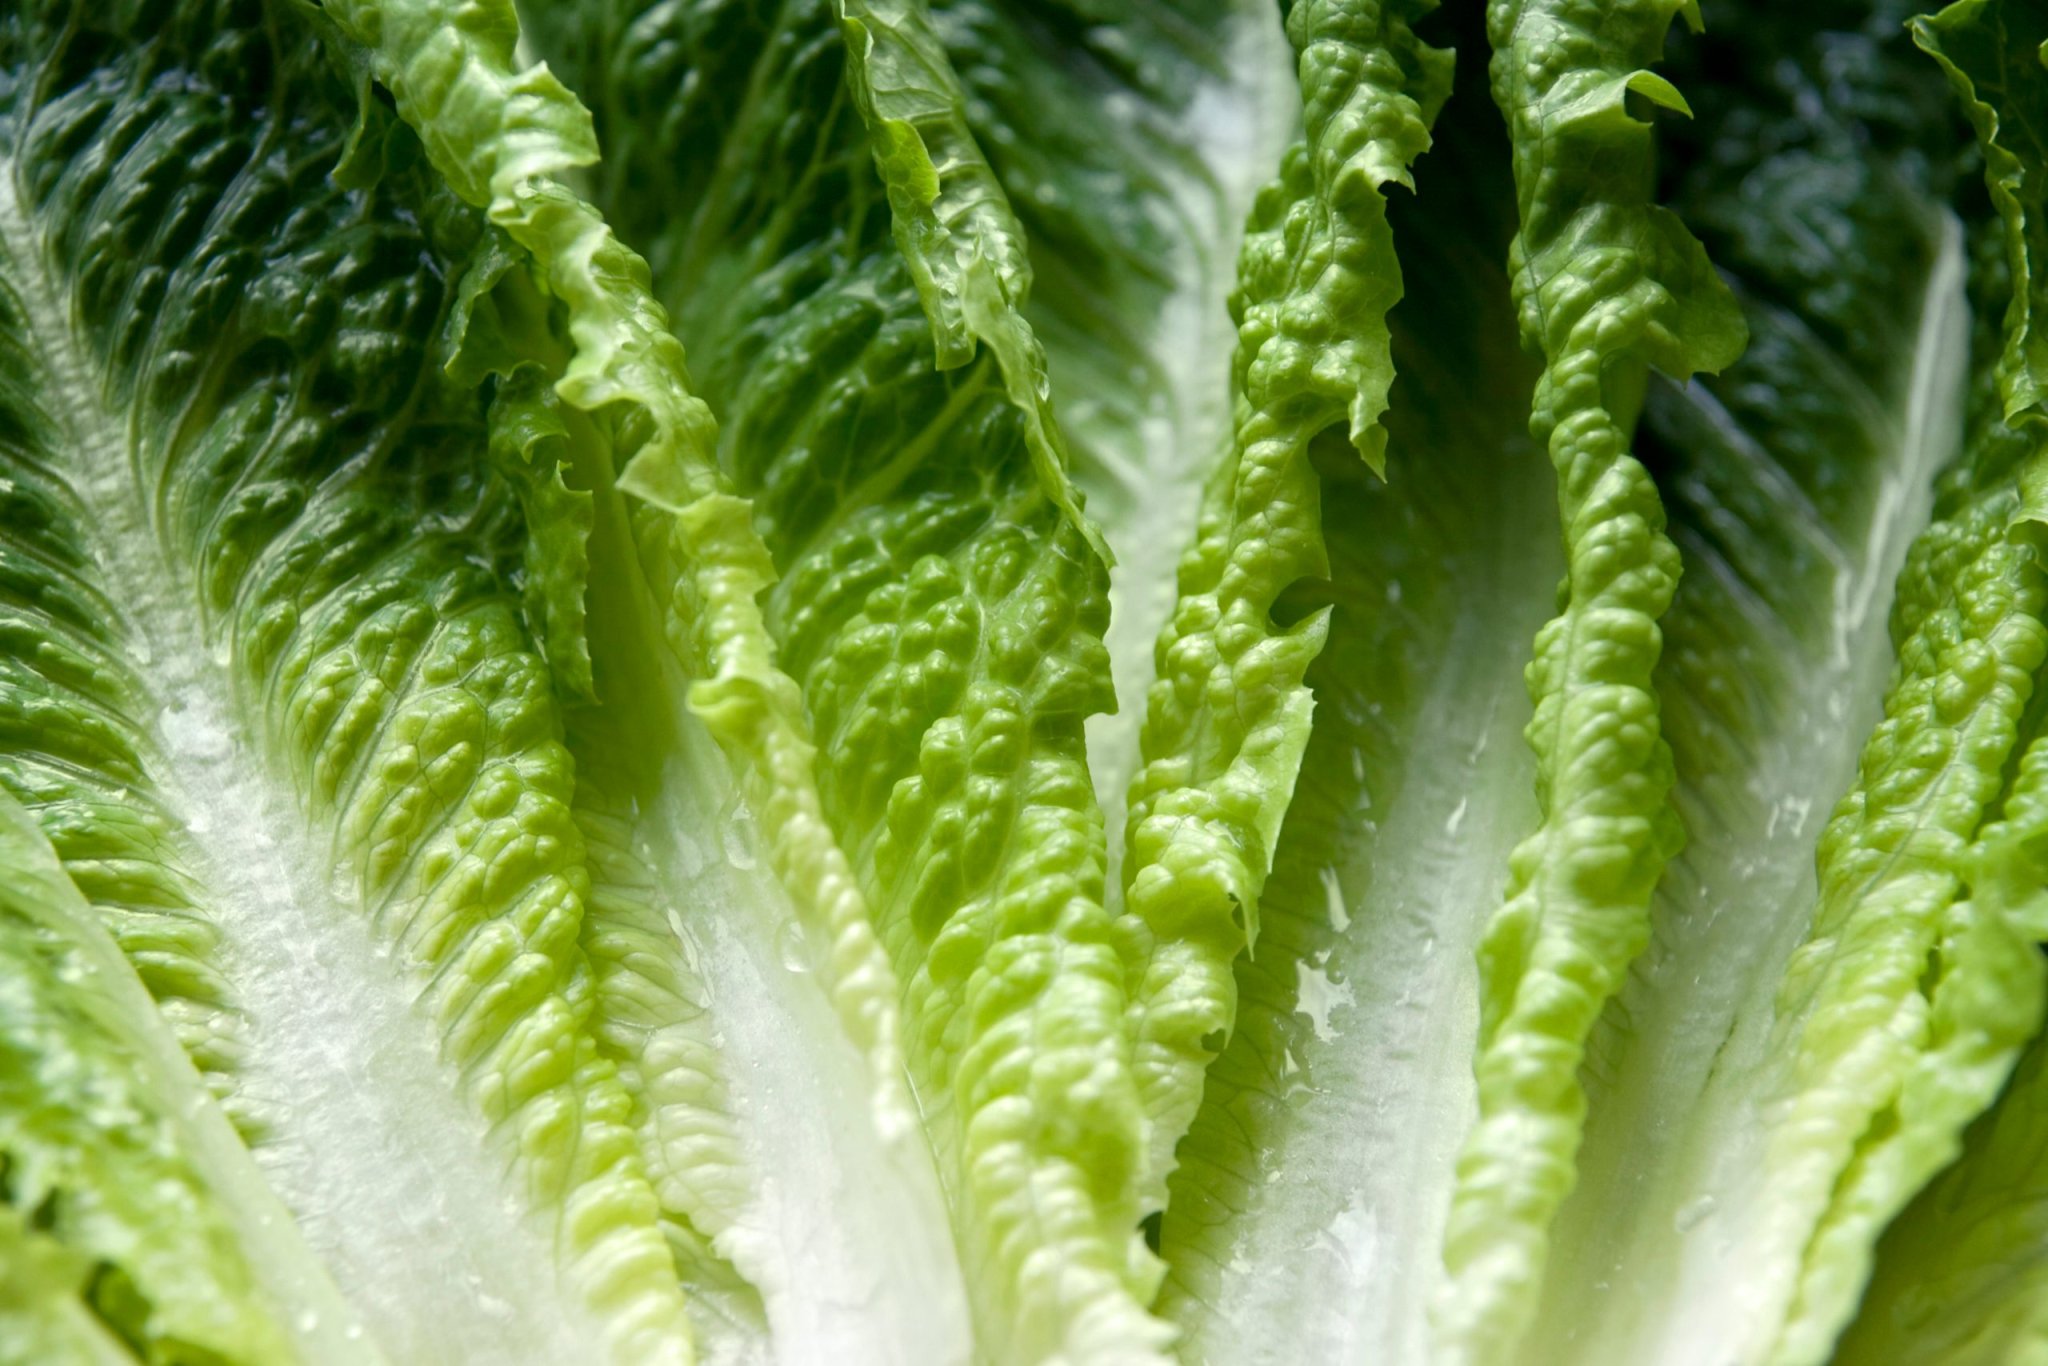 This Viral Video Shows You How to Cut Lettuce In 1 Second Flat